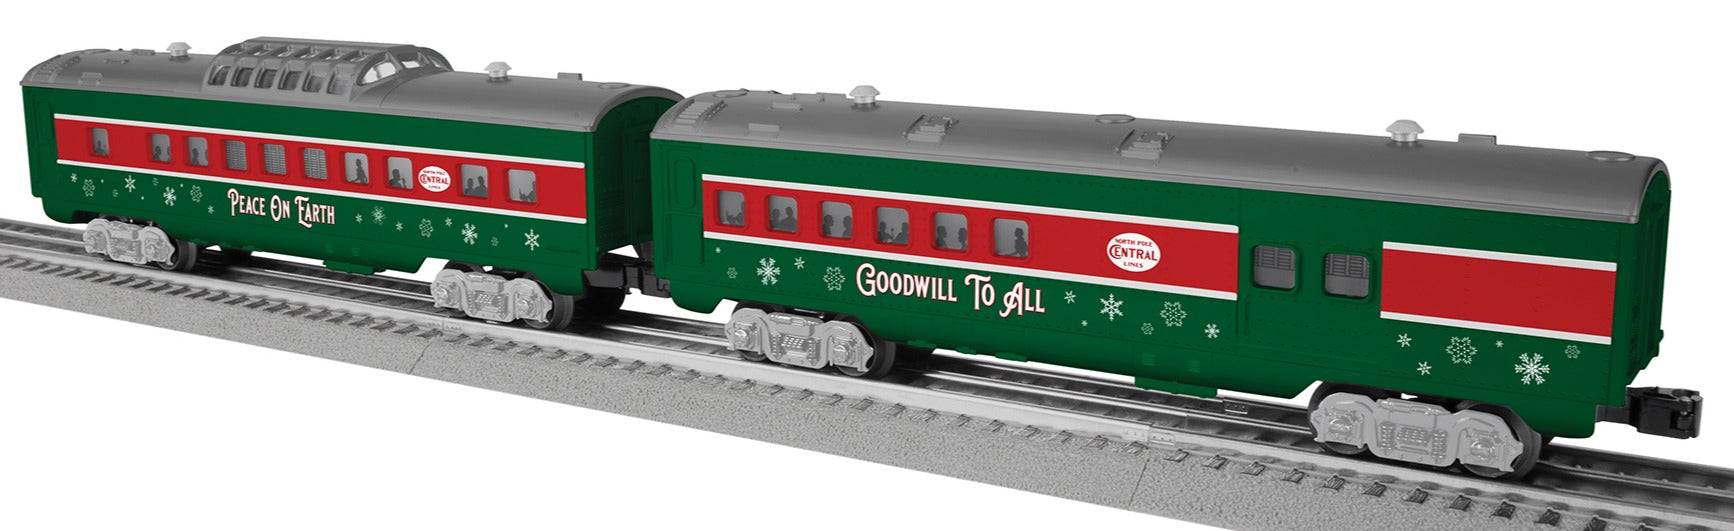 Lionel 2427980 - "North Pole Central" Sleigh Bell Limited Streamlined Passenger Car (2-Car) Add-On